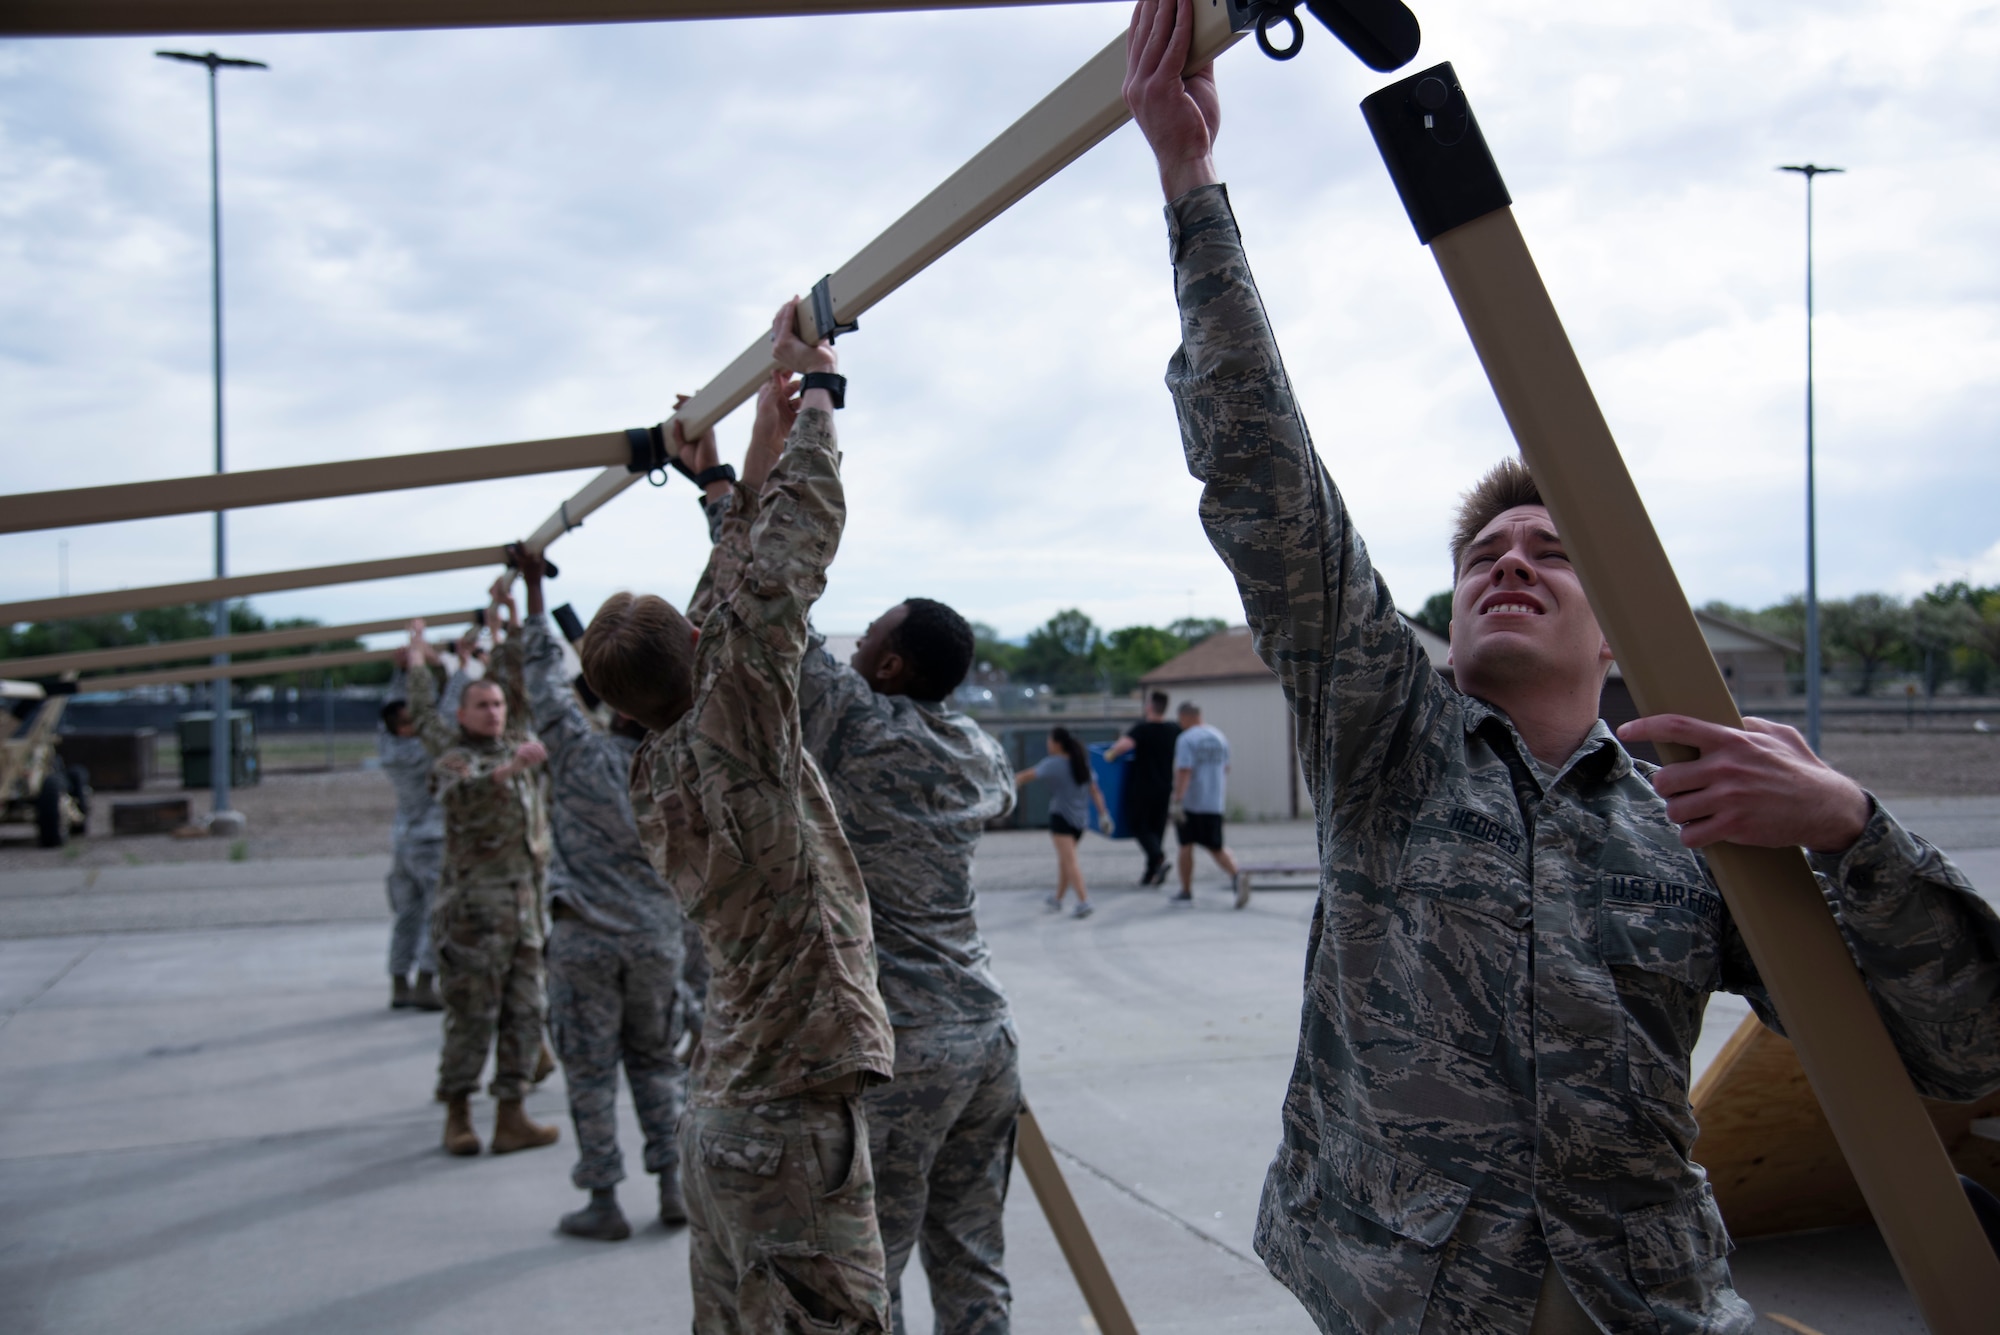 366th Fighter Wing A2 (Intell) Airmen attach the legs of the support structure to the TM60 tent, June 3, 2020, on Mountain Home Air Force Base, Idaho. A trained team of Airmen are able to fully assemble the TM60 tent and have it mission ready in 30 minutes. (U.S. Air Force photo by Airman 1st Class Nicholas Swift)